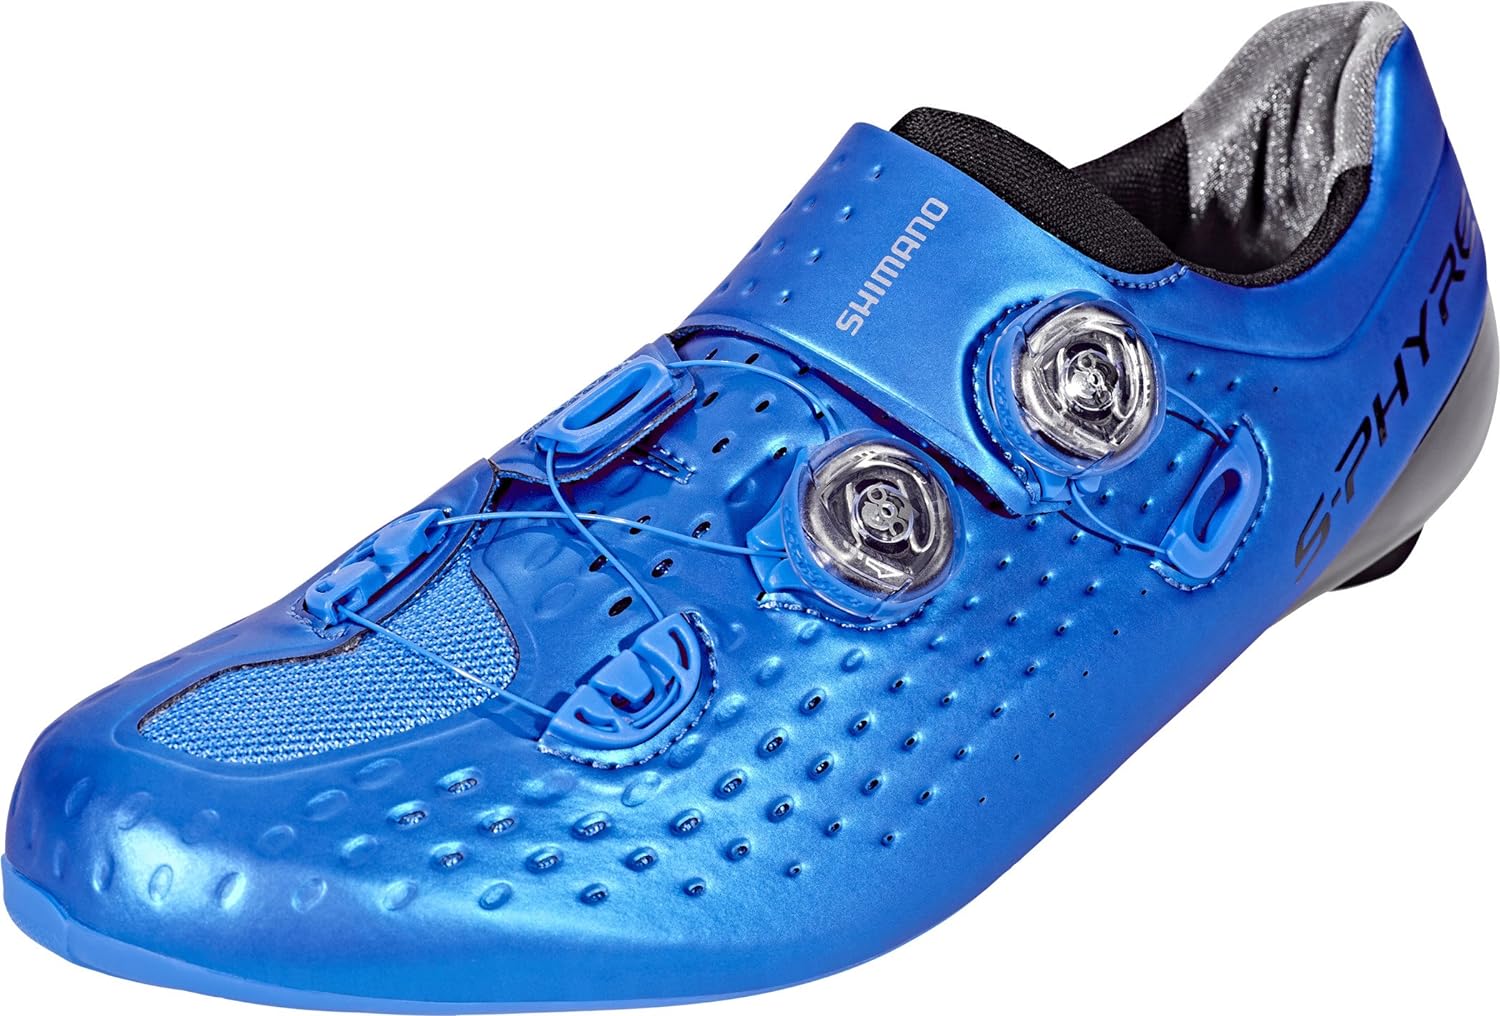 Shimano S-Phyre RC9B Road Shoe Blue Size 44